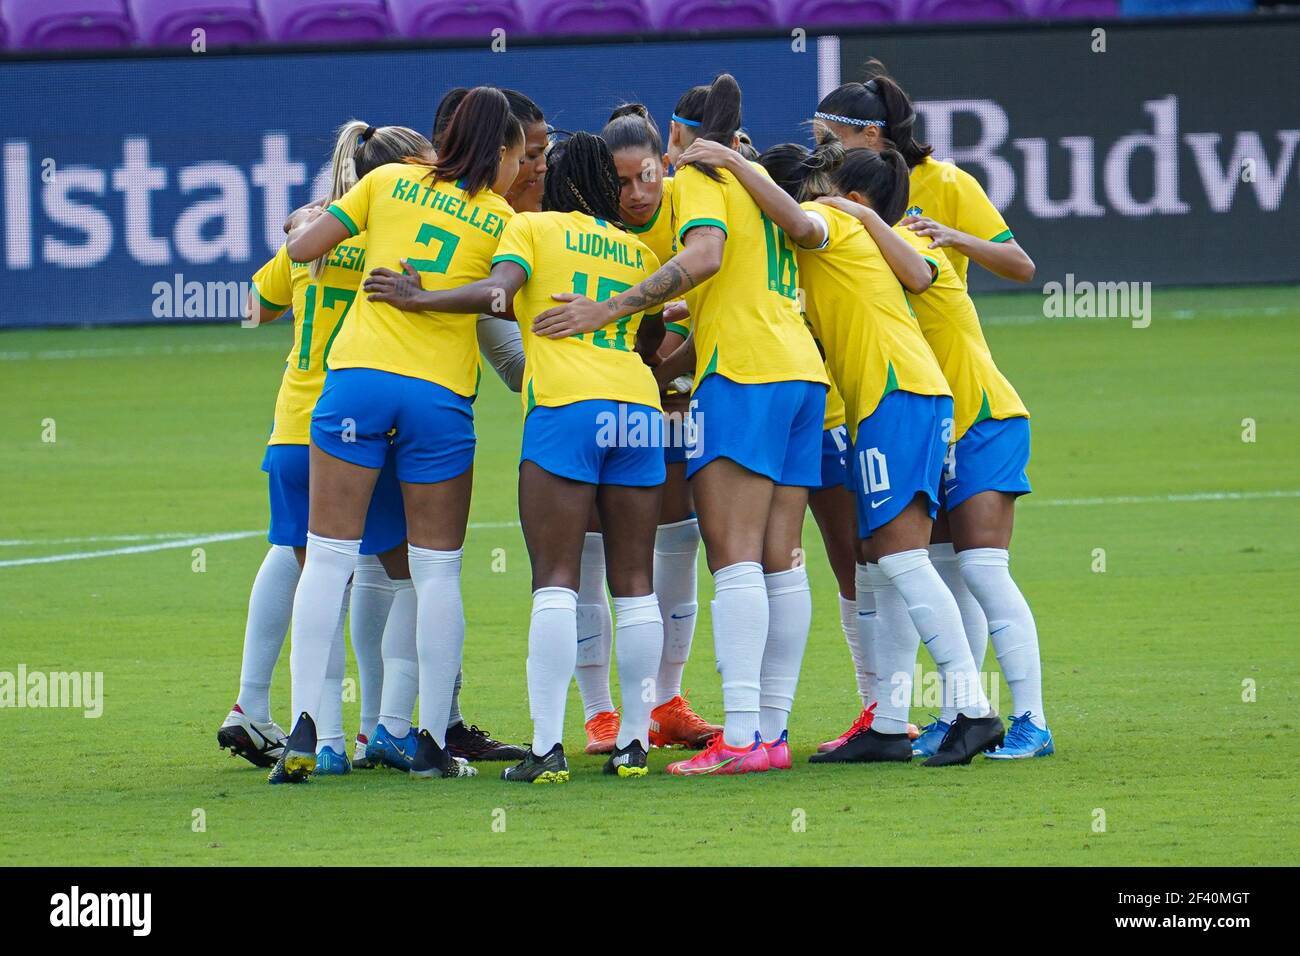 Orlando, Florida, USA, February 21, 2021, Brazil's Women National Team  hundles during the SheBelieves Cup at Exploria Stadium (Photo Credit: Marty  Jean-Louis Stock Photo - Alamy